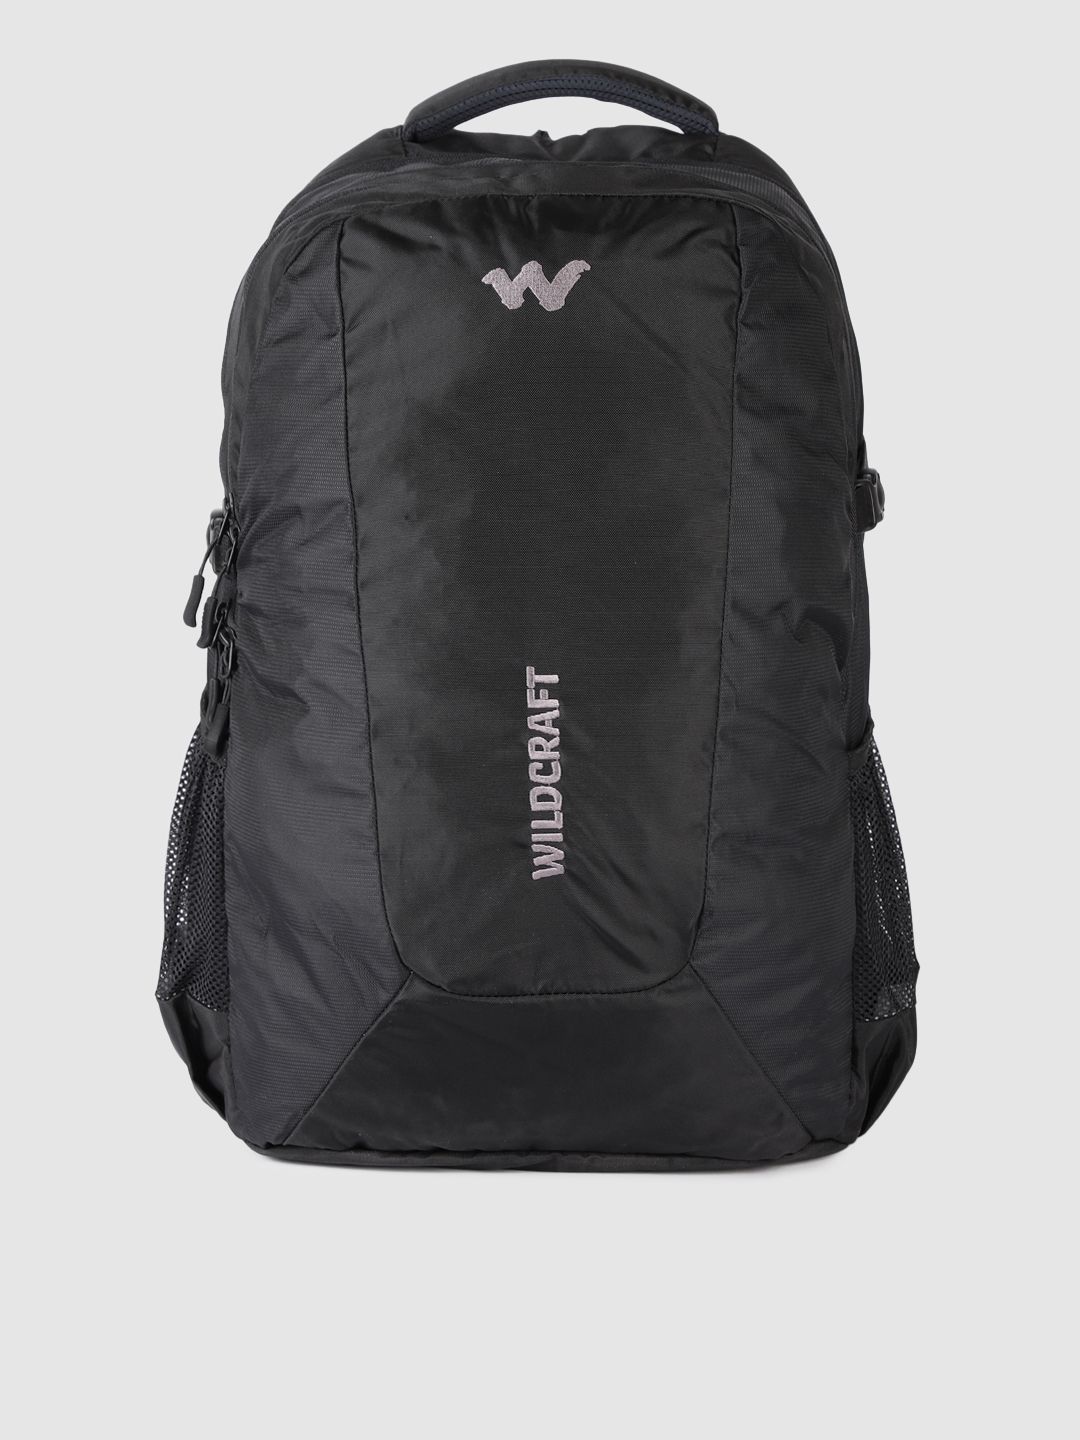 Wildcraft Unisex Black Trident 3.0 Solid Backpack Price in India